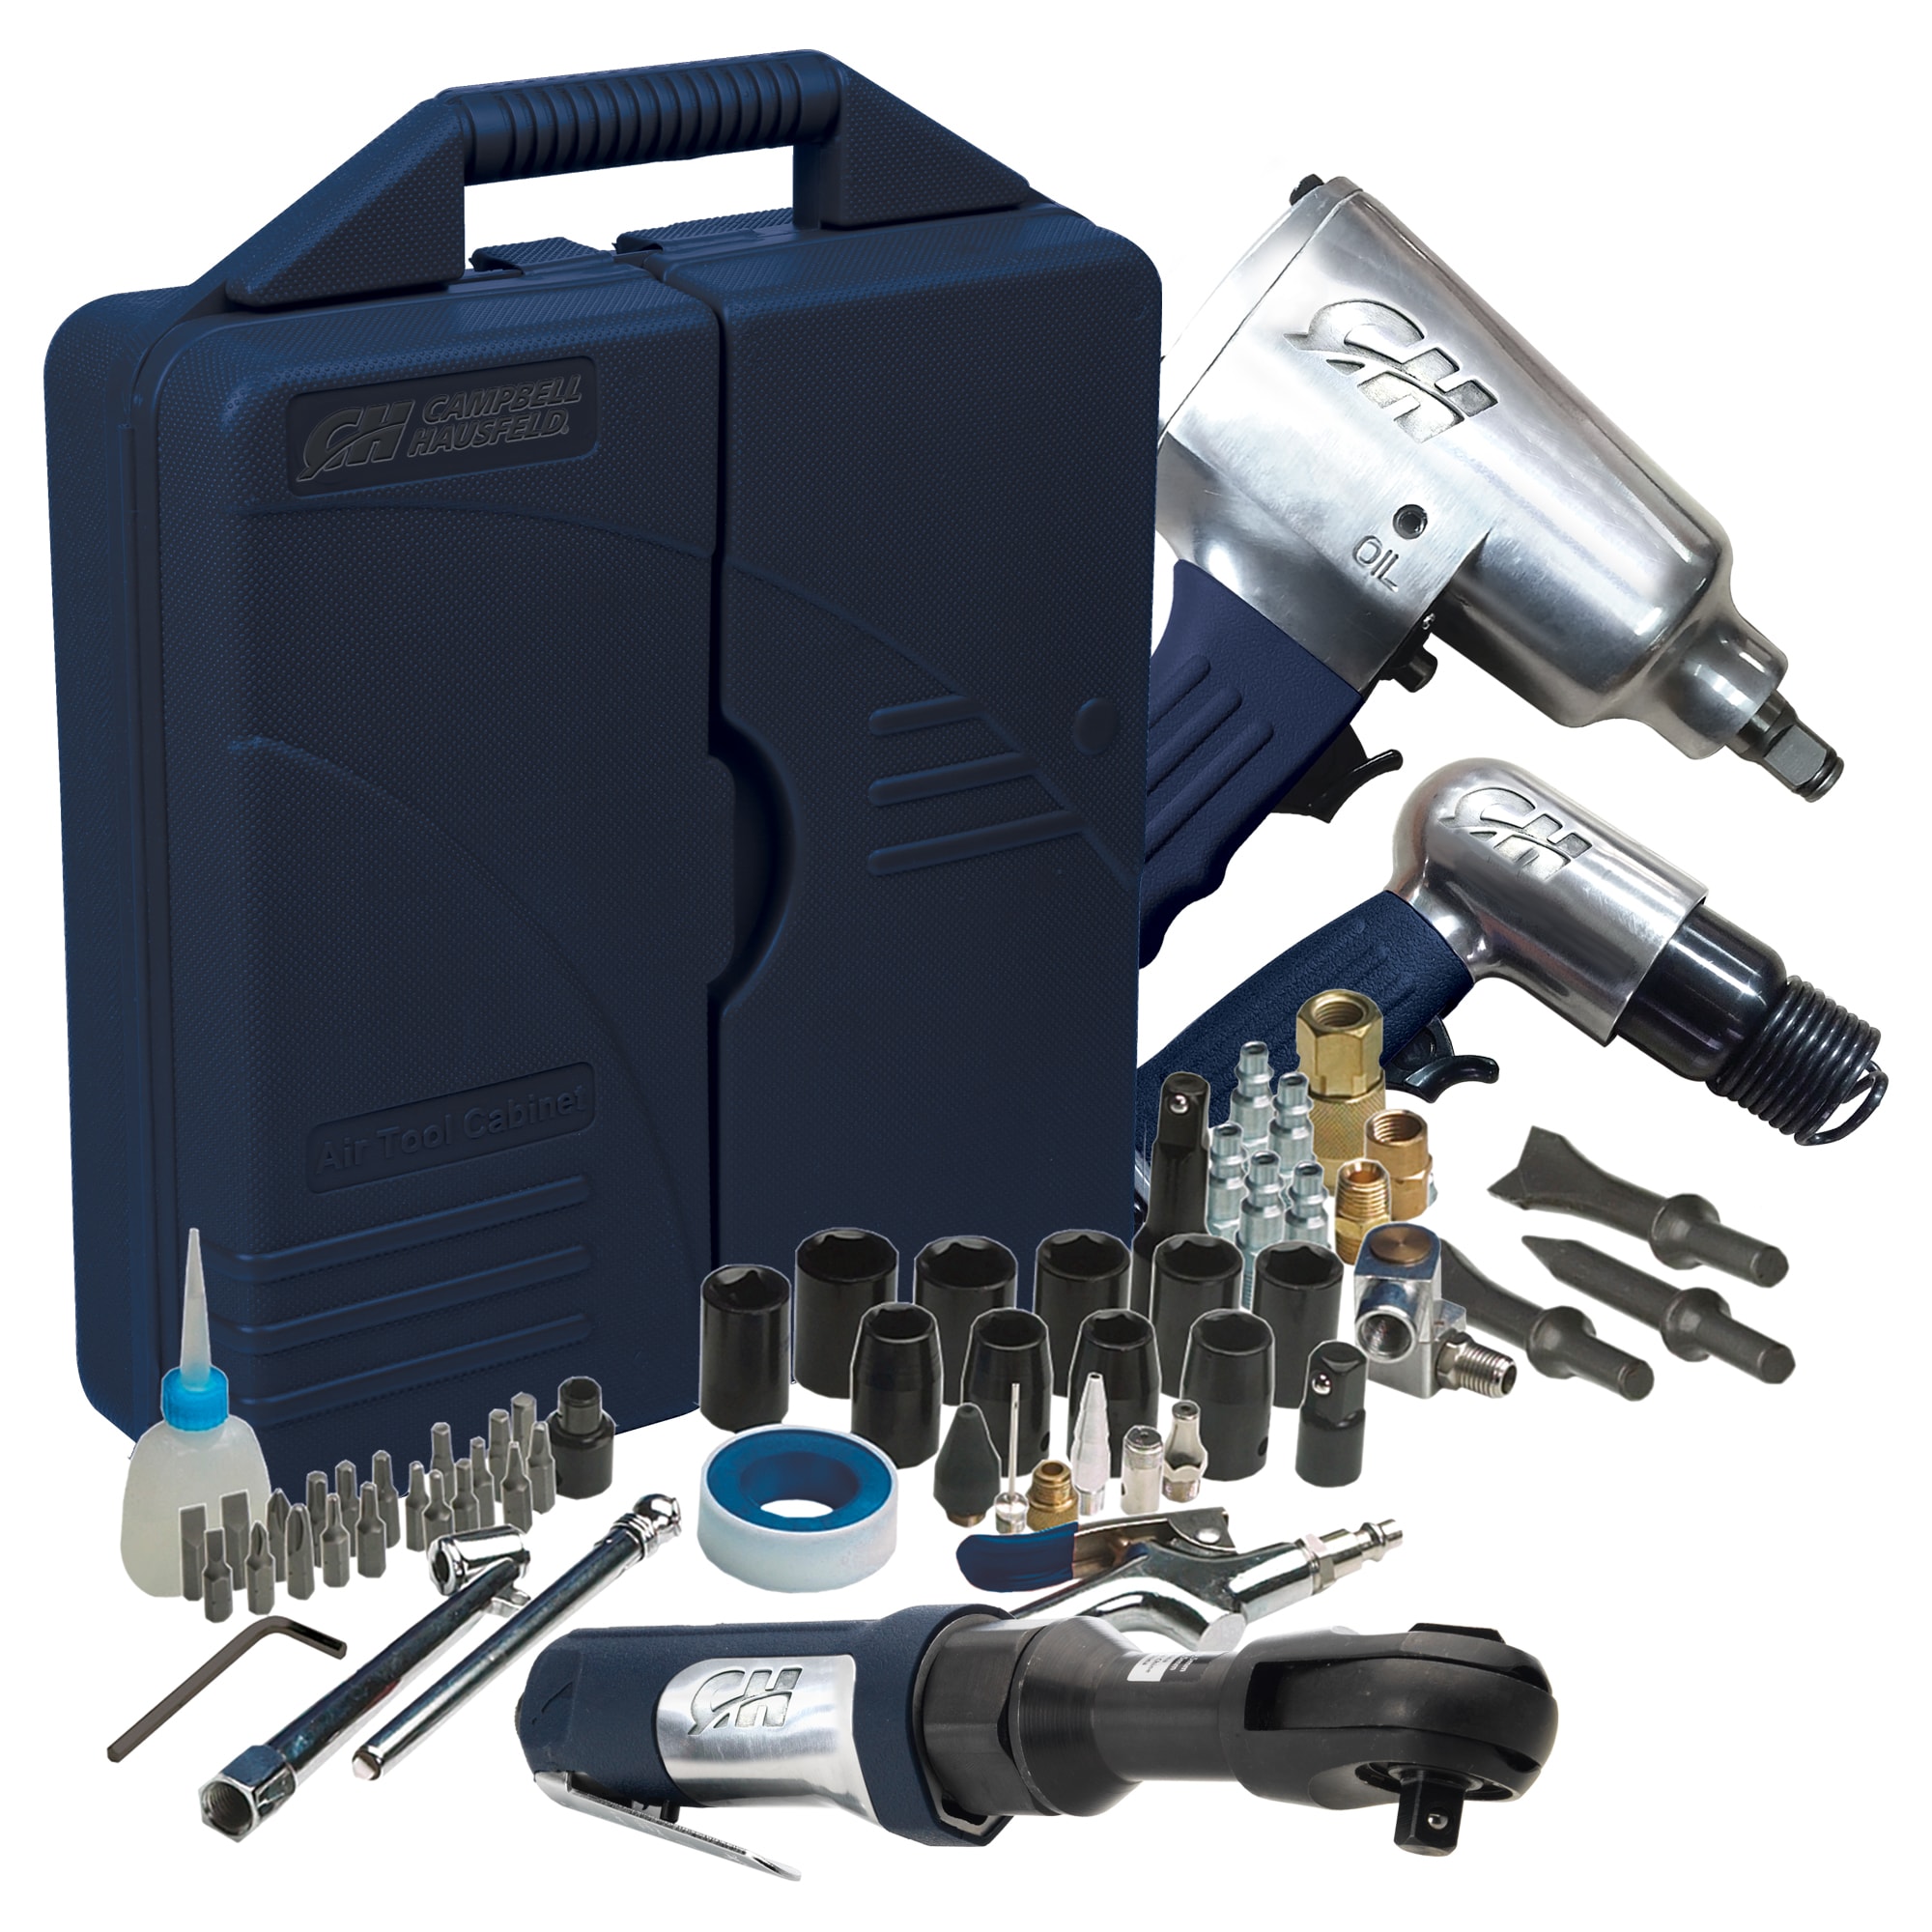 Trades Pro 71 Piece Air Tool and Accessories Kit with Storage Case 836668 